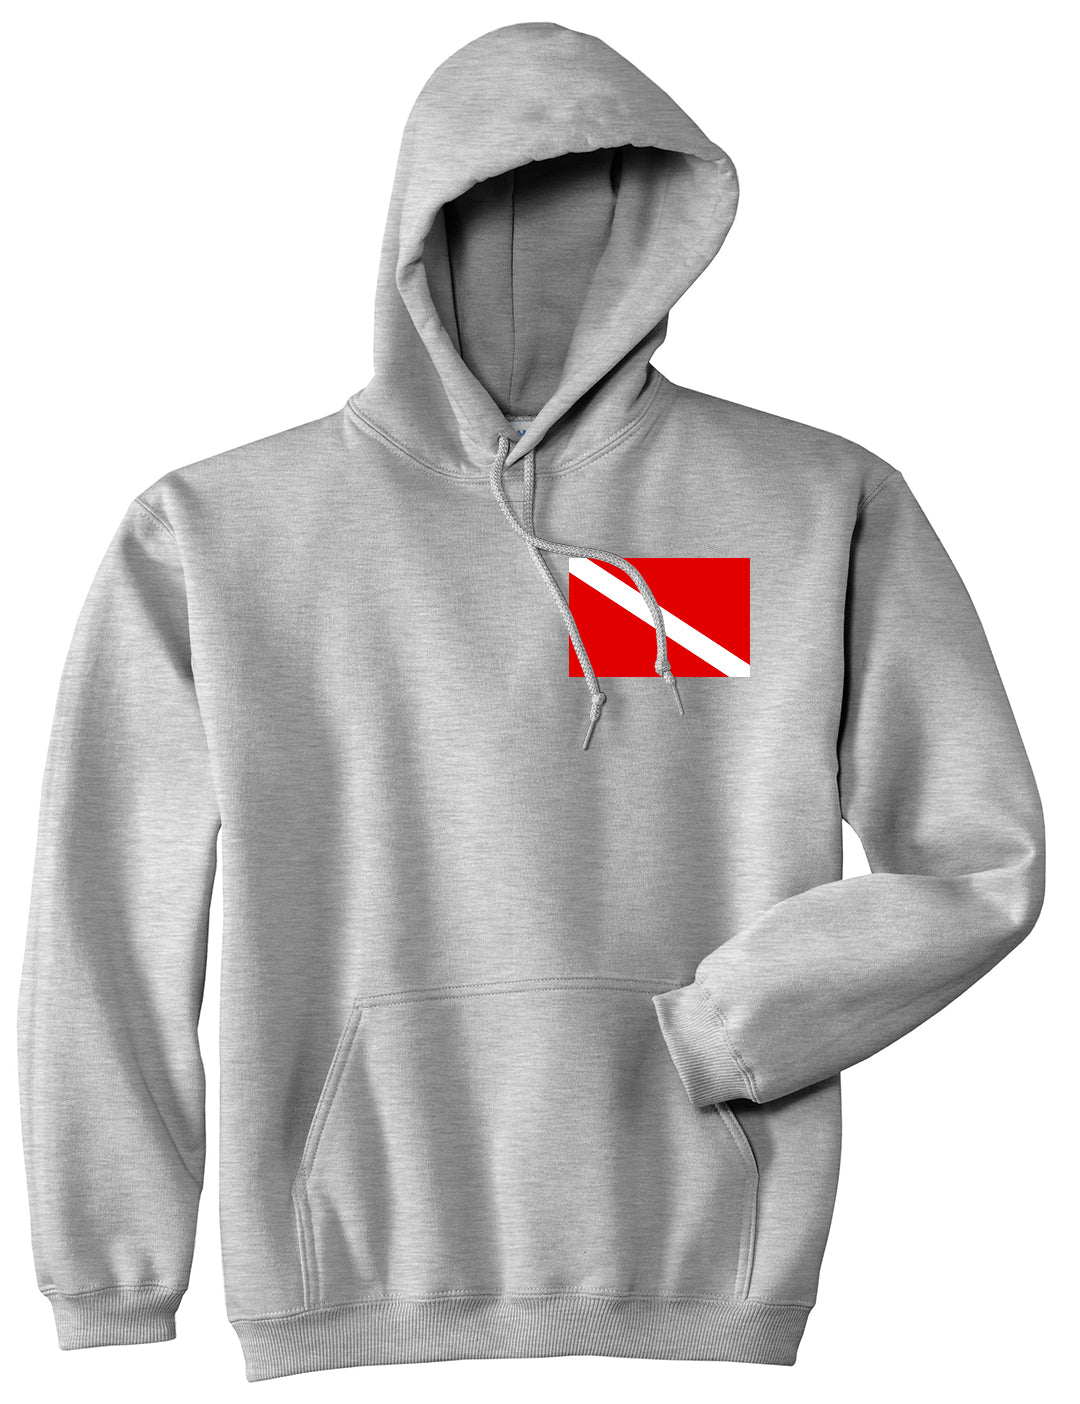 Scuba Dive Flag Chest Mens Grey Pullover Hoodie by Kings Of NY